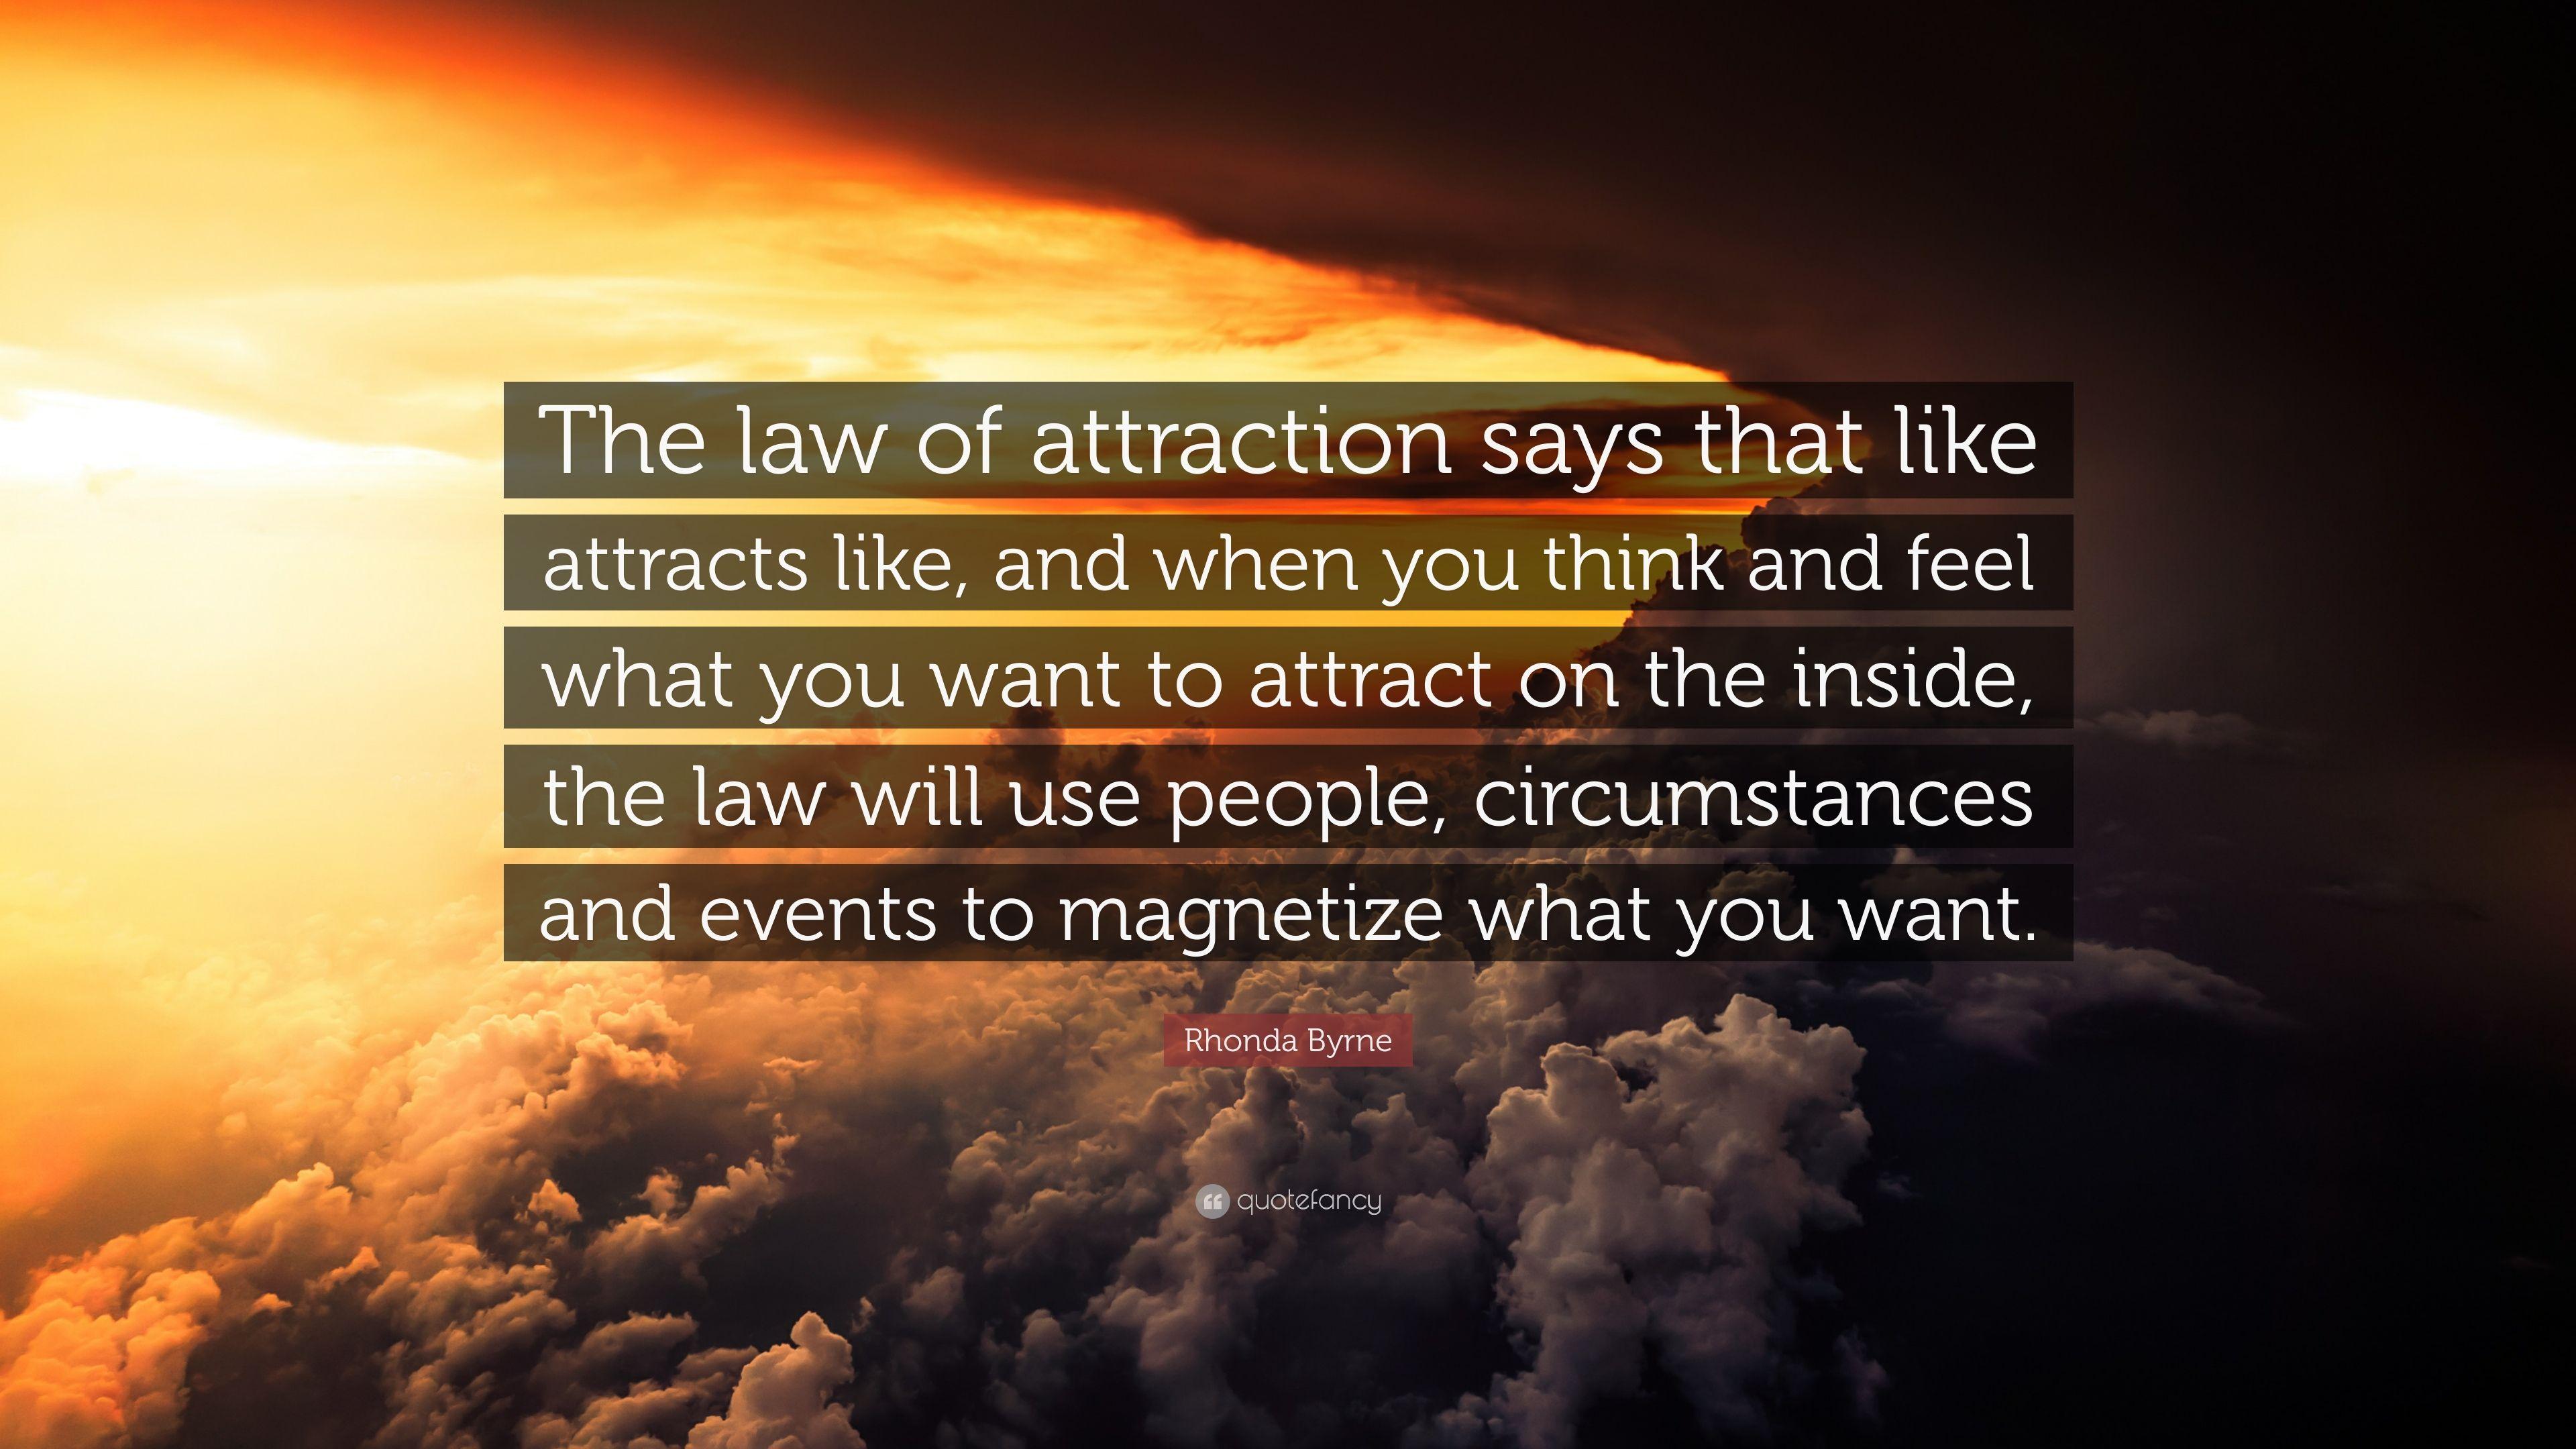 618001 The Law of Attraction is the Law of Love  Rhonda Byrne quote   Rare Gallery HD Wallpapers